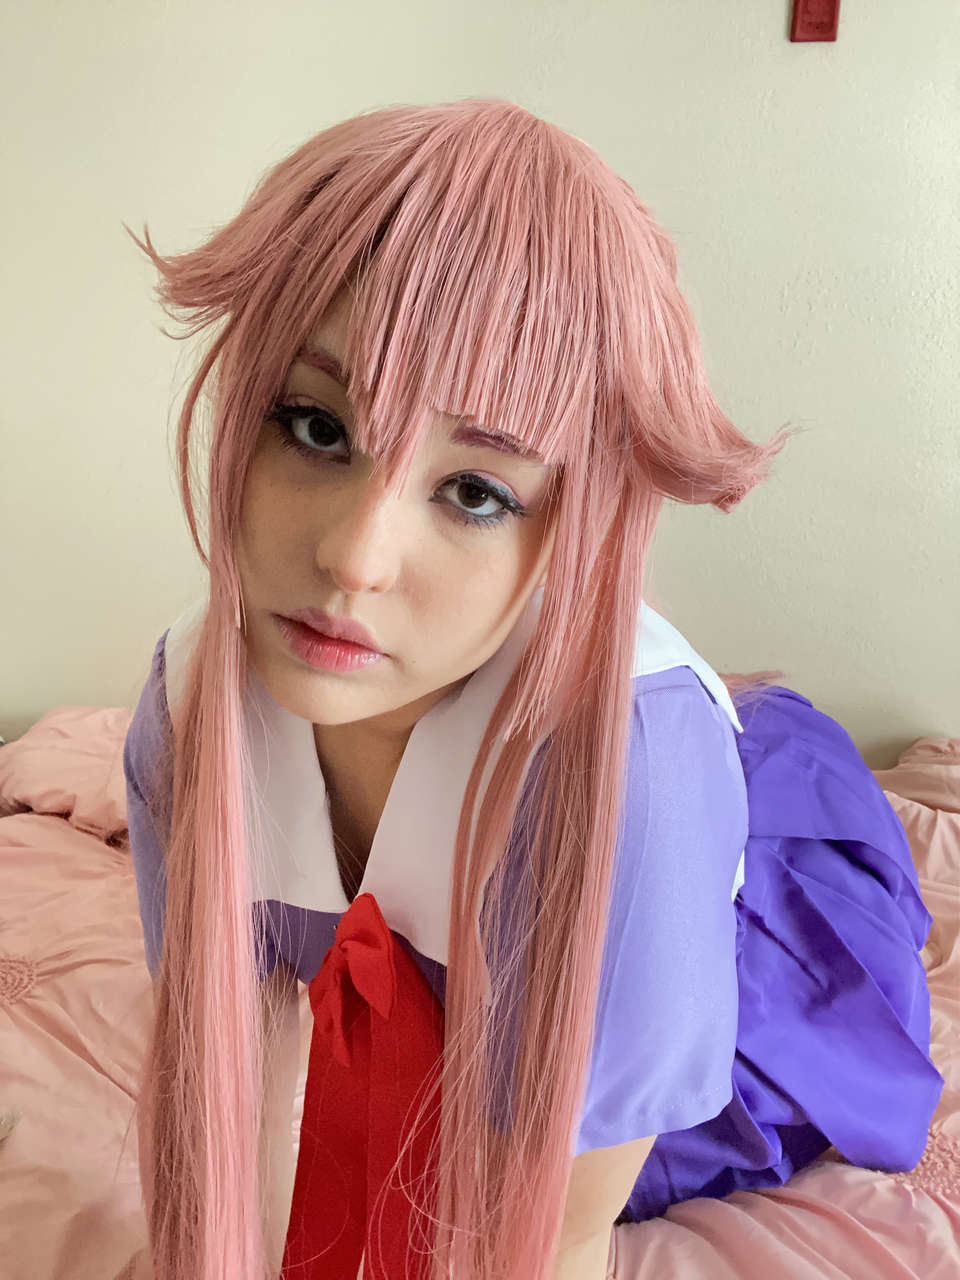 Im New To This Sub But Heres My Yuno Gasai Cospla